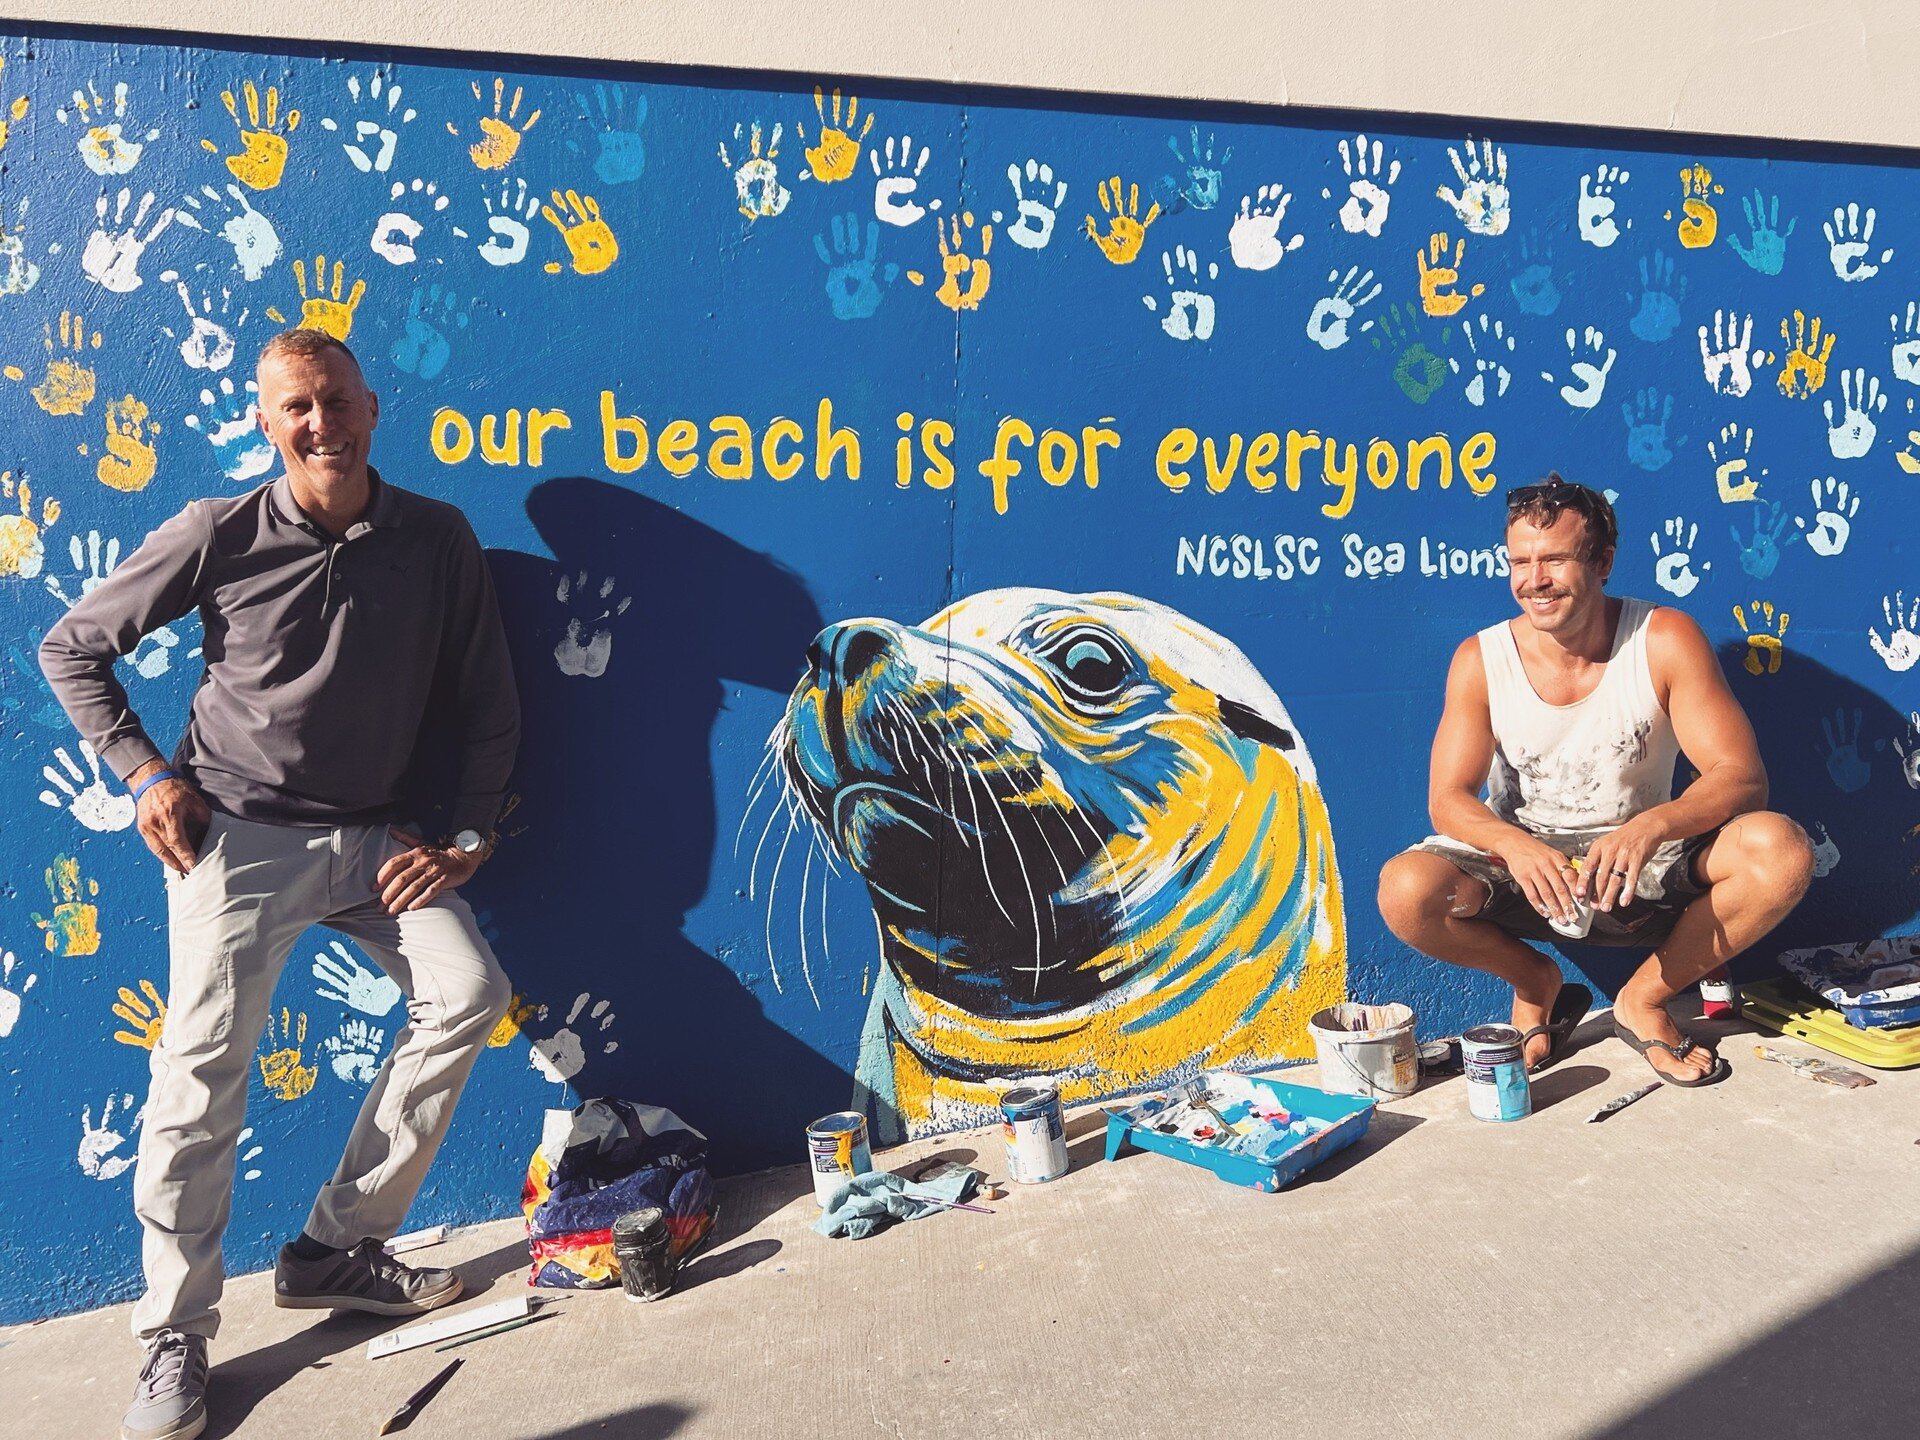 Art meets inclusivity at North Cottesloe! Shoutout to Shakey and Ray for the fresh 'Our Beach is for Everyone' mural. Here's to making waves with the Sea Lions Program which officially kicked off last Sunday. 

Some snaps from the @duluxaus community